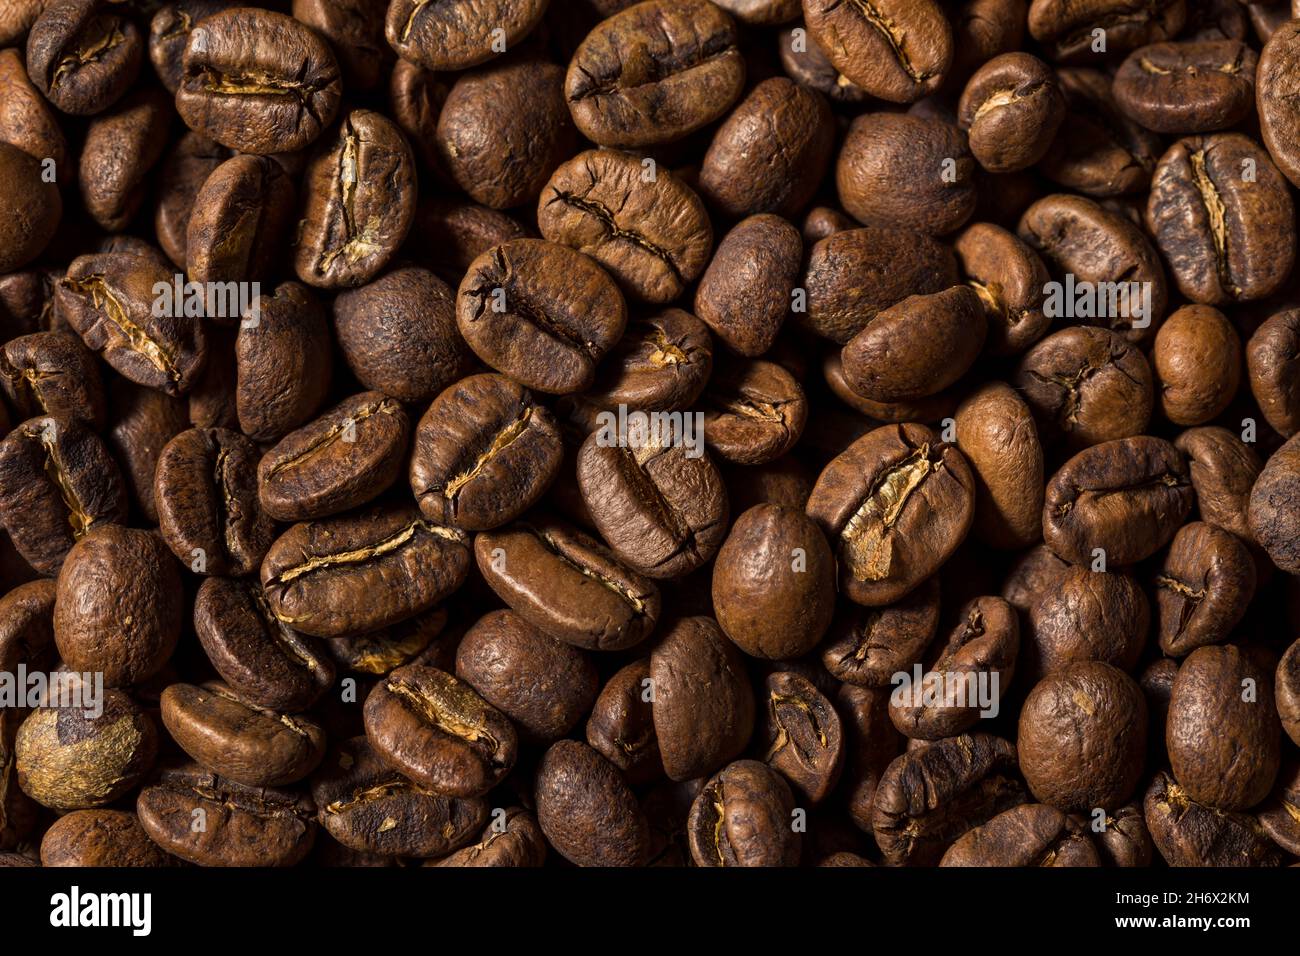 Raw Organic Roasted Espresso Coffee Beans in a Bowl Stock Photo